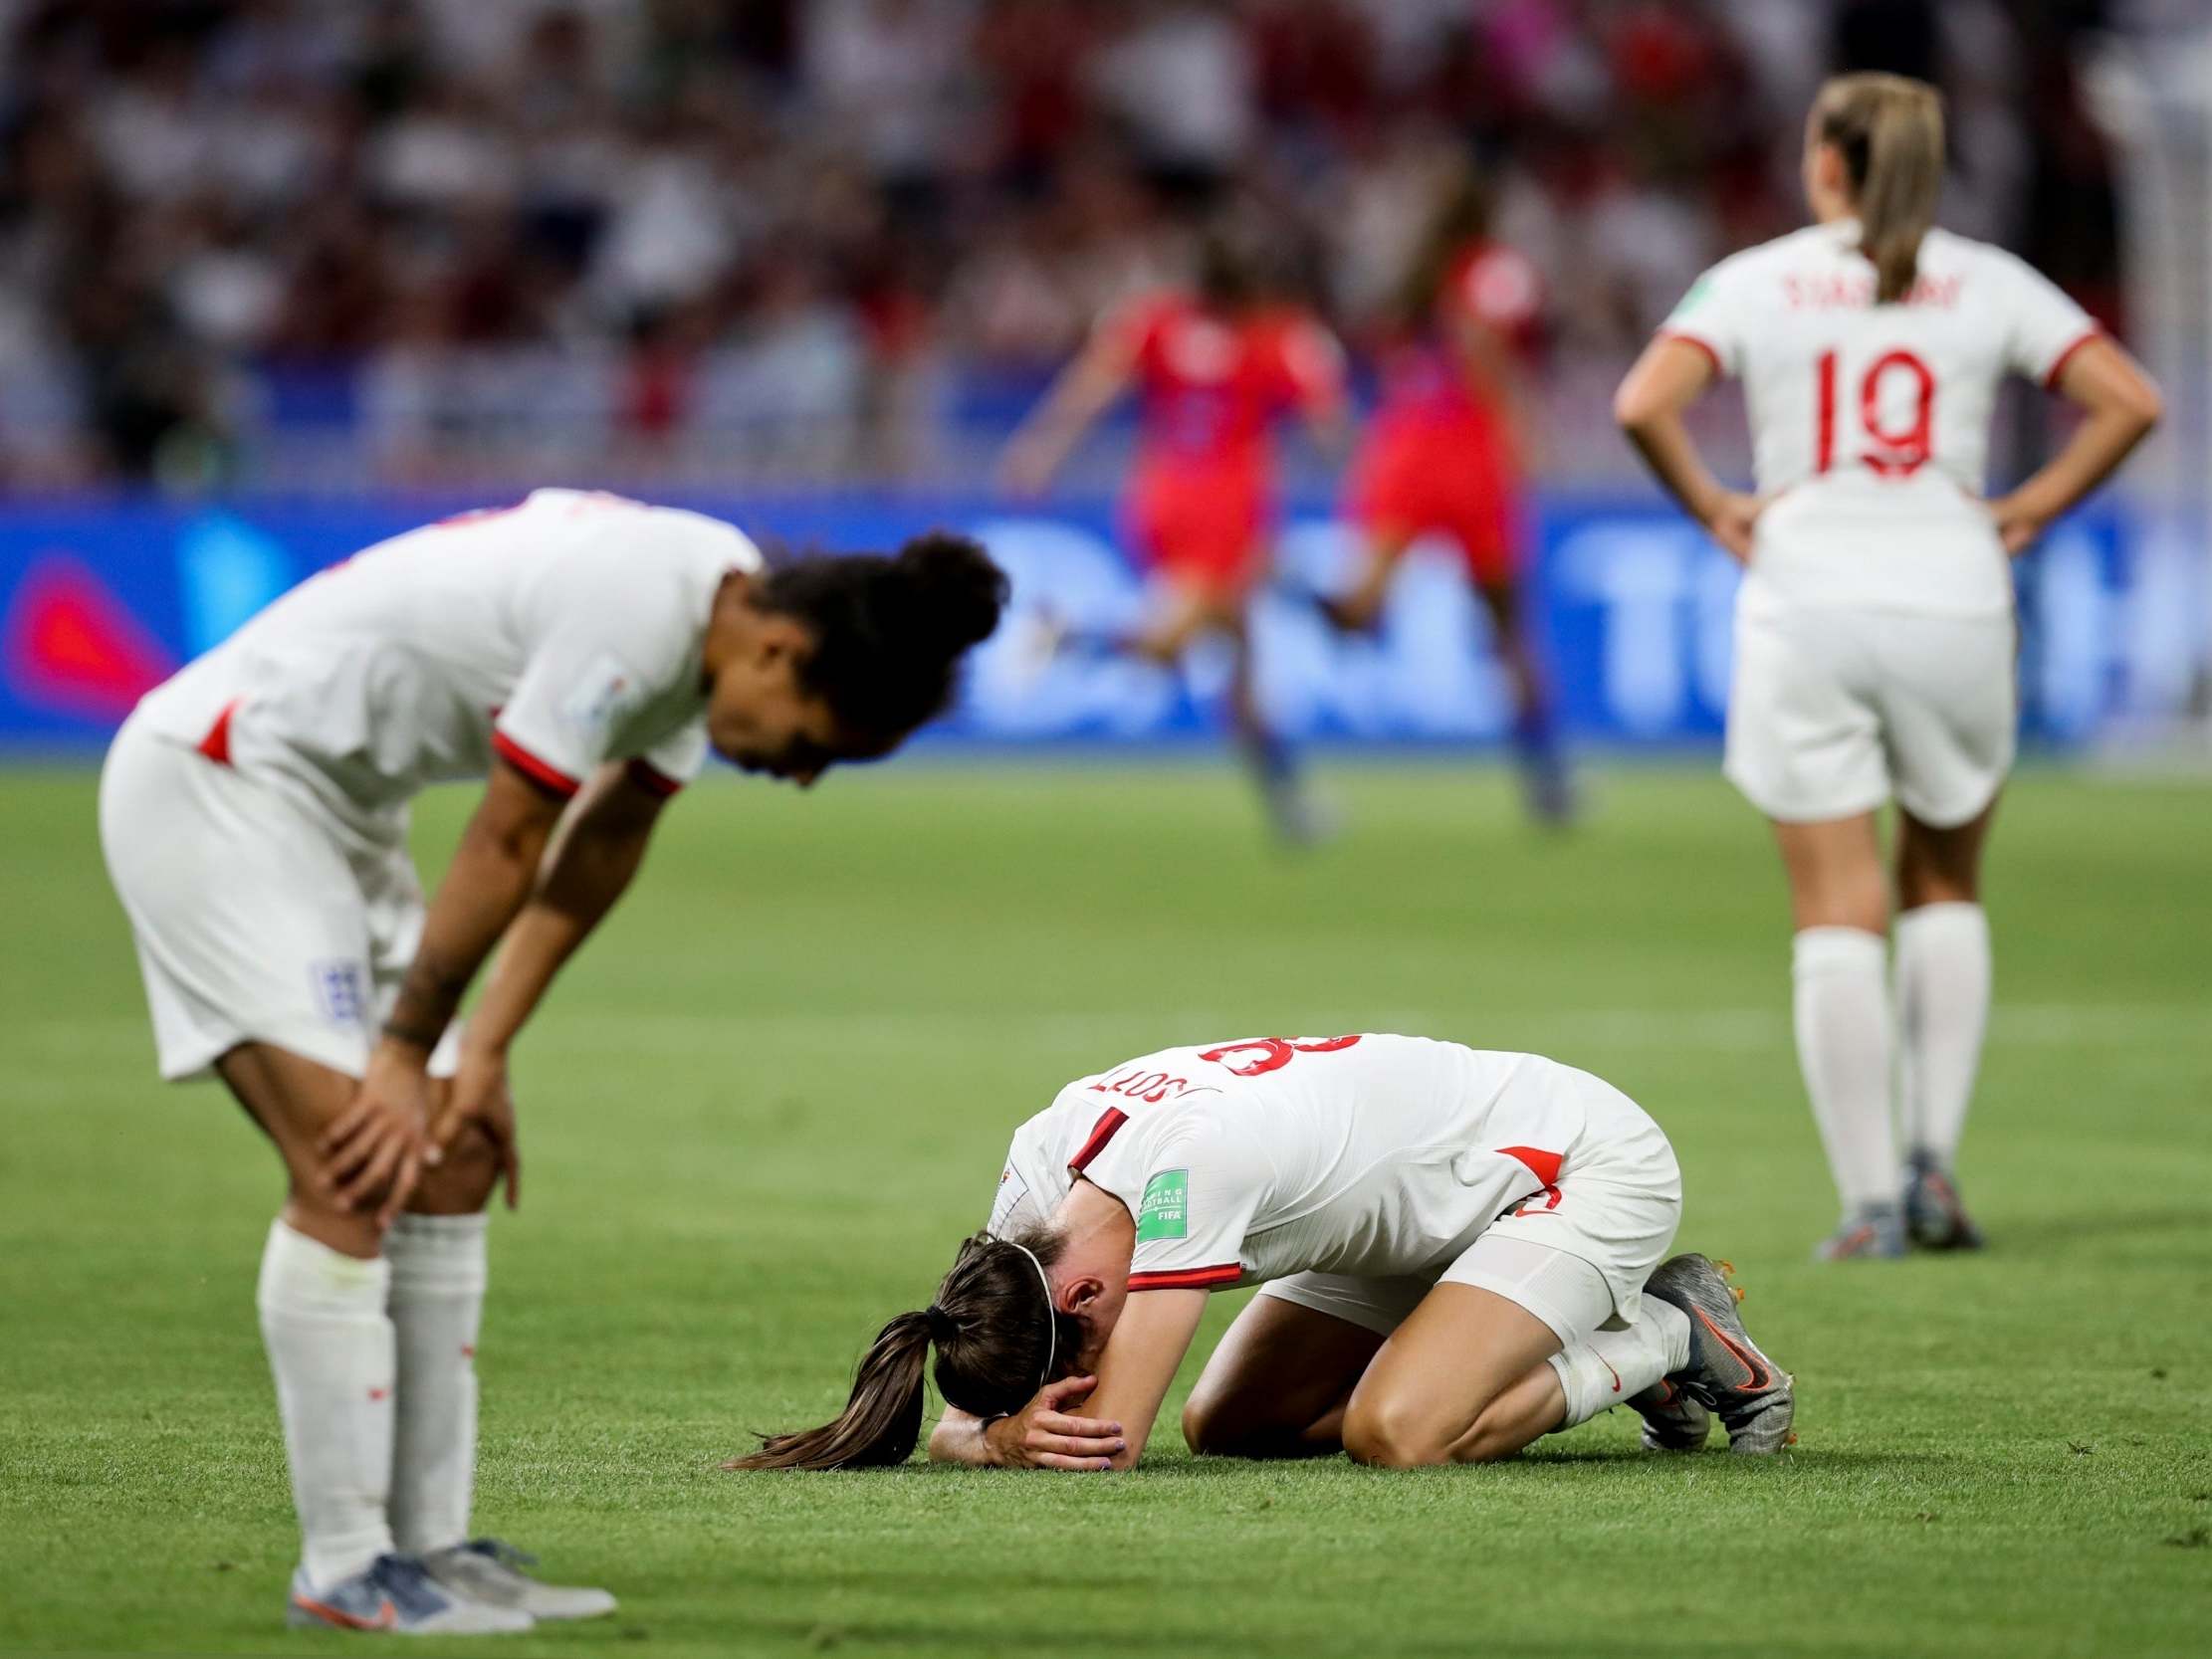 USA vs England result: Lionesses knocked out of Women's World Cup after